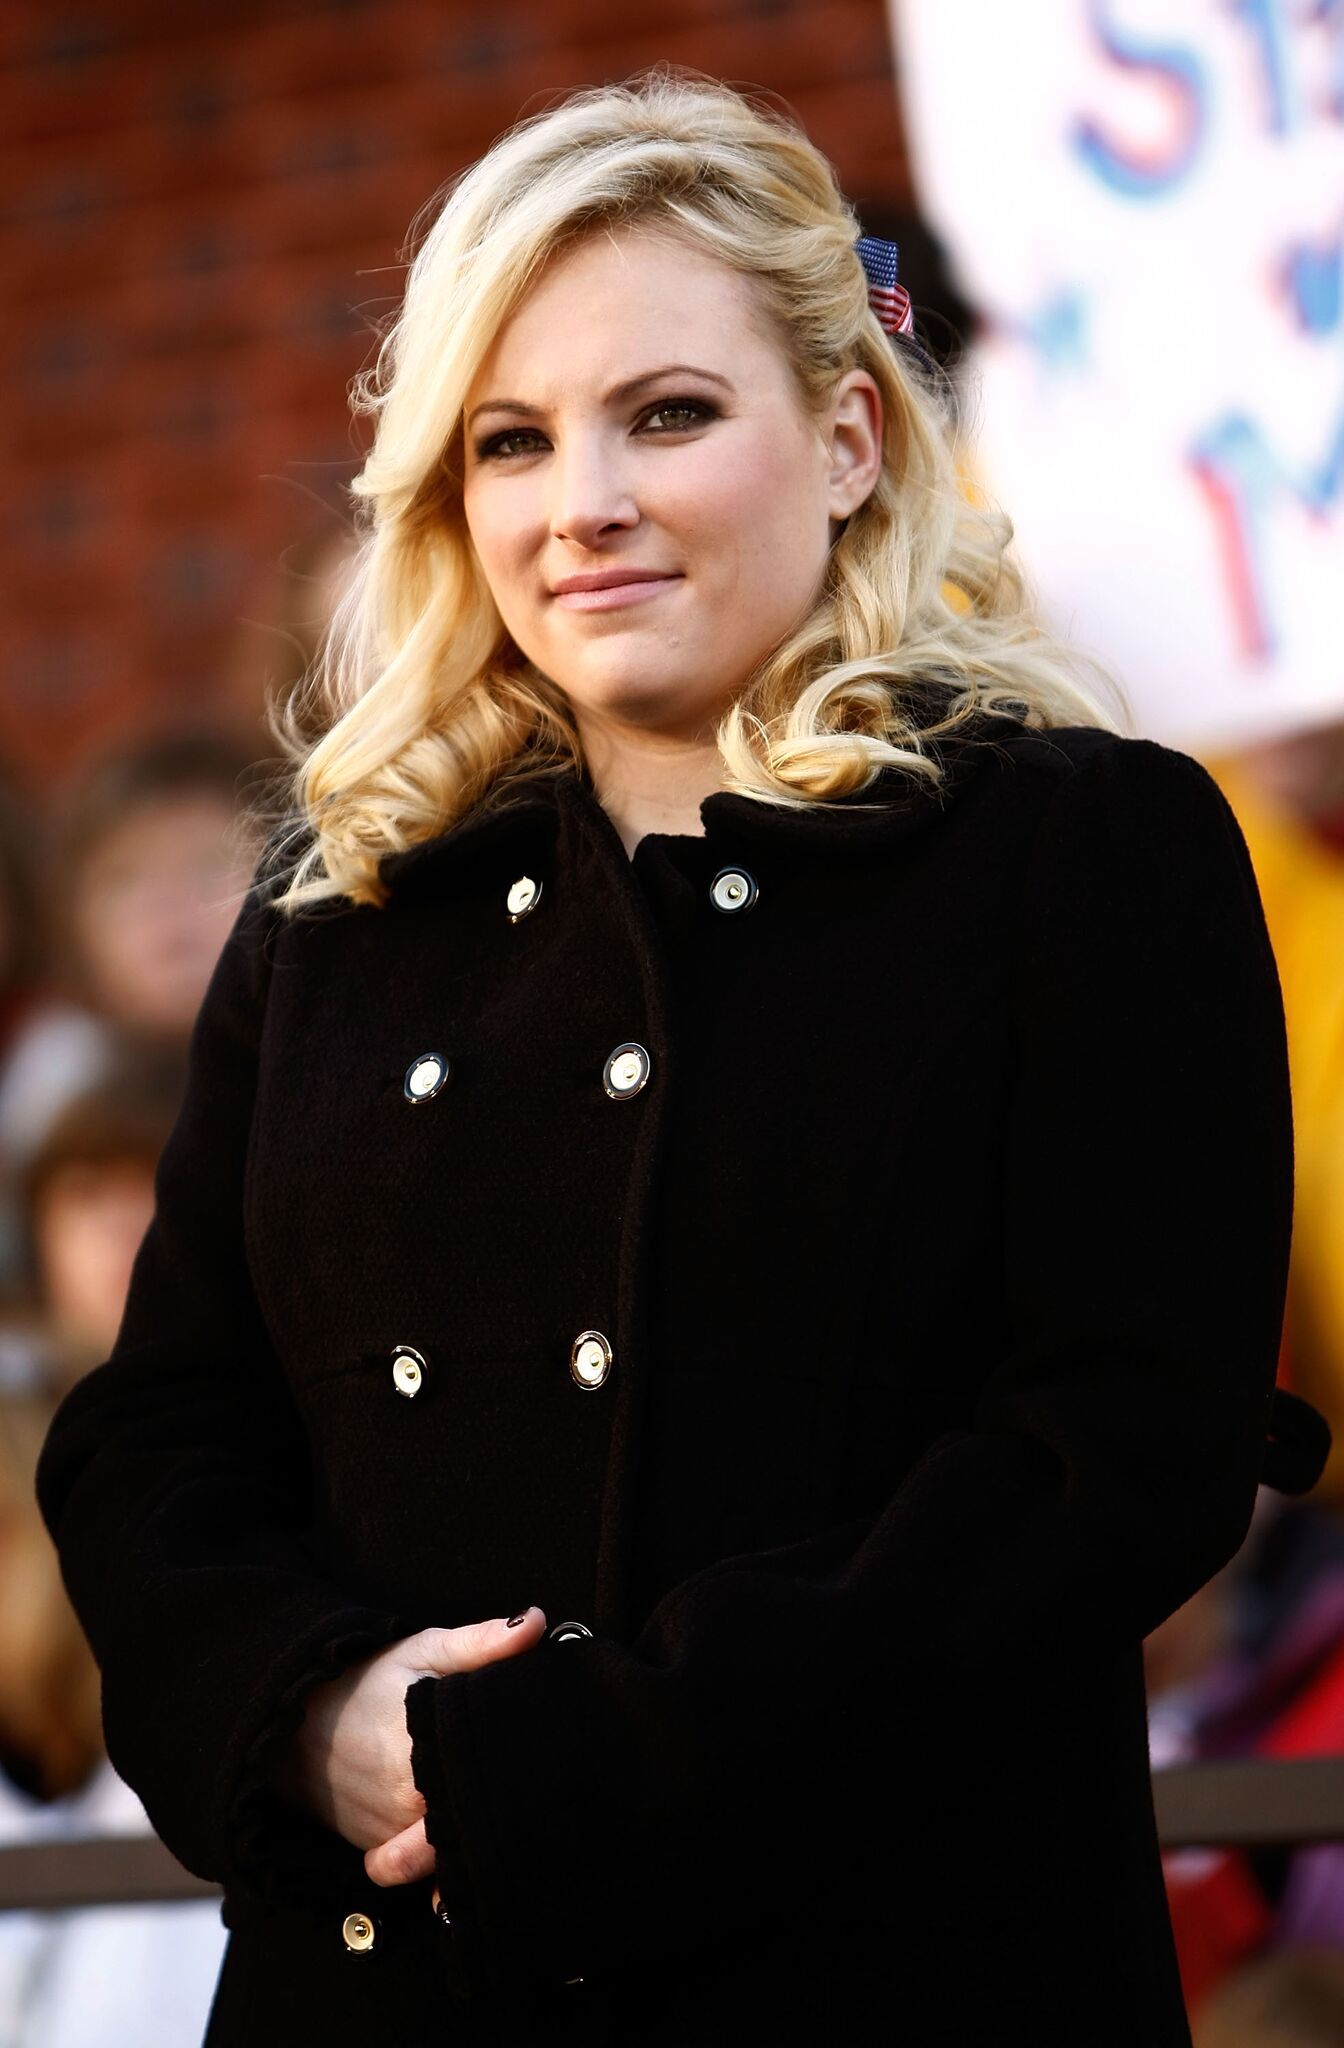 Meghan McCain attends a campaign rally at Defiance Junior High School October 30, 2008. | Photo: Getty Images